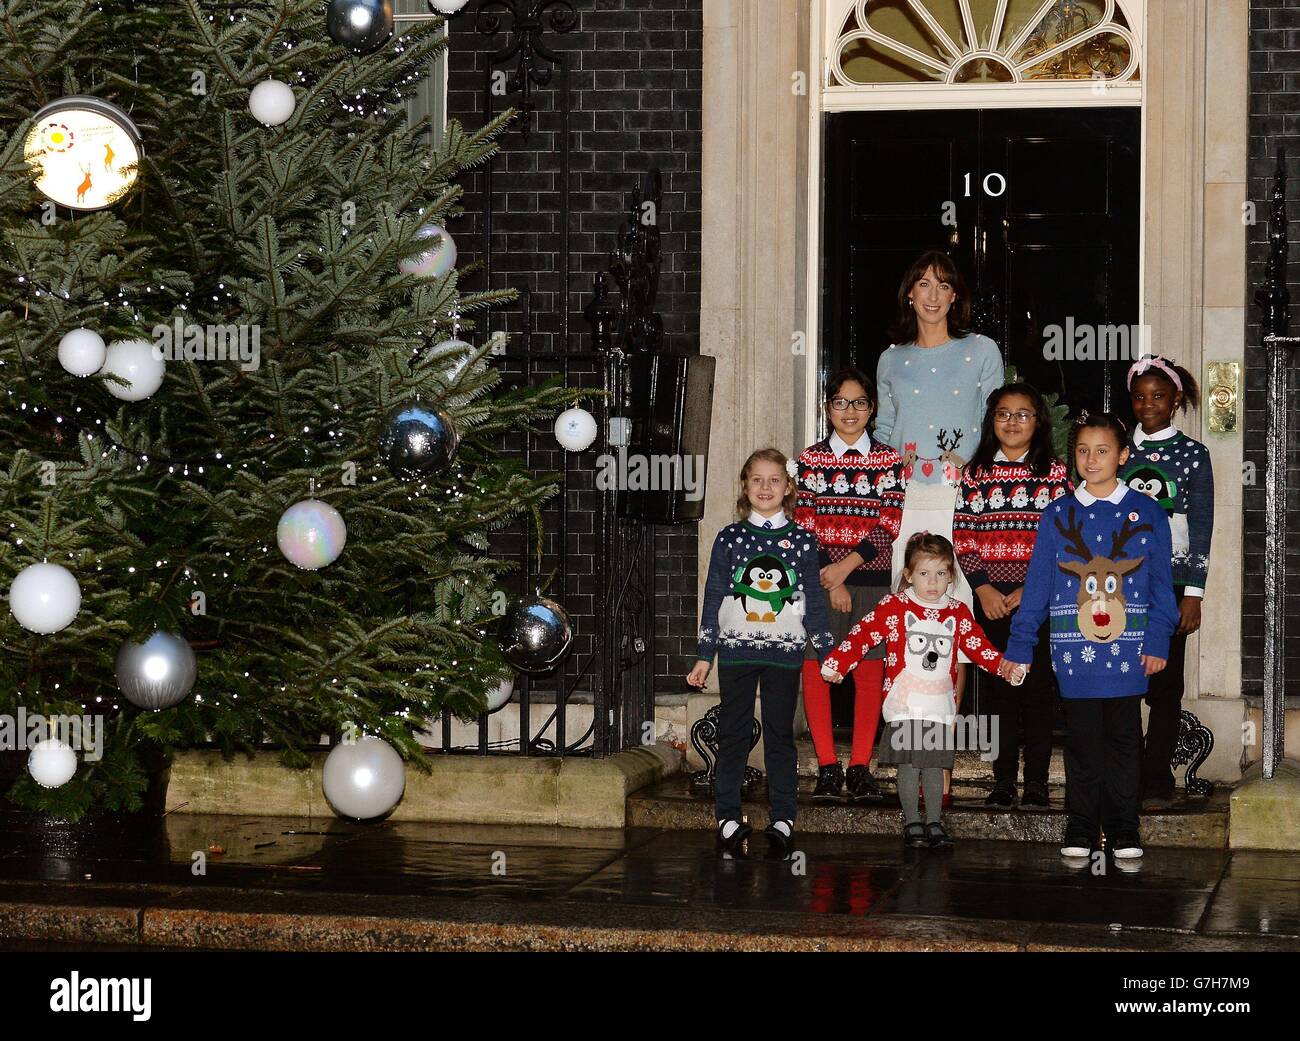 Samantha Cameron, wife of the Prime Minister David Cameron, stands with children for the Save the Children Christmas Jumper Day outside 10 Downing Street, London. Stock Photo